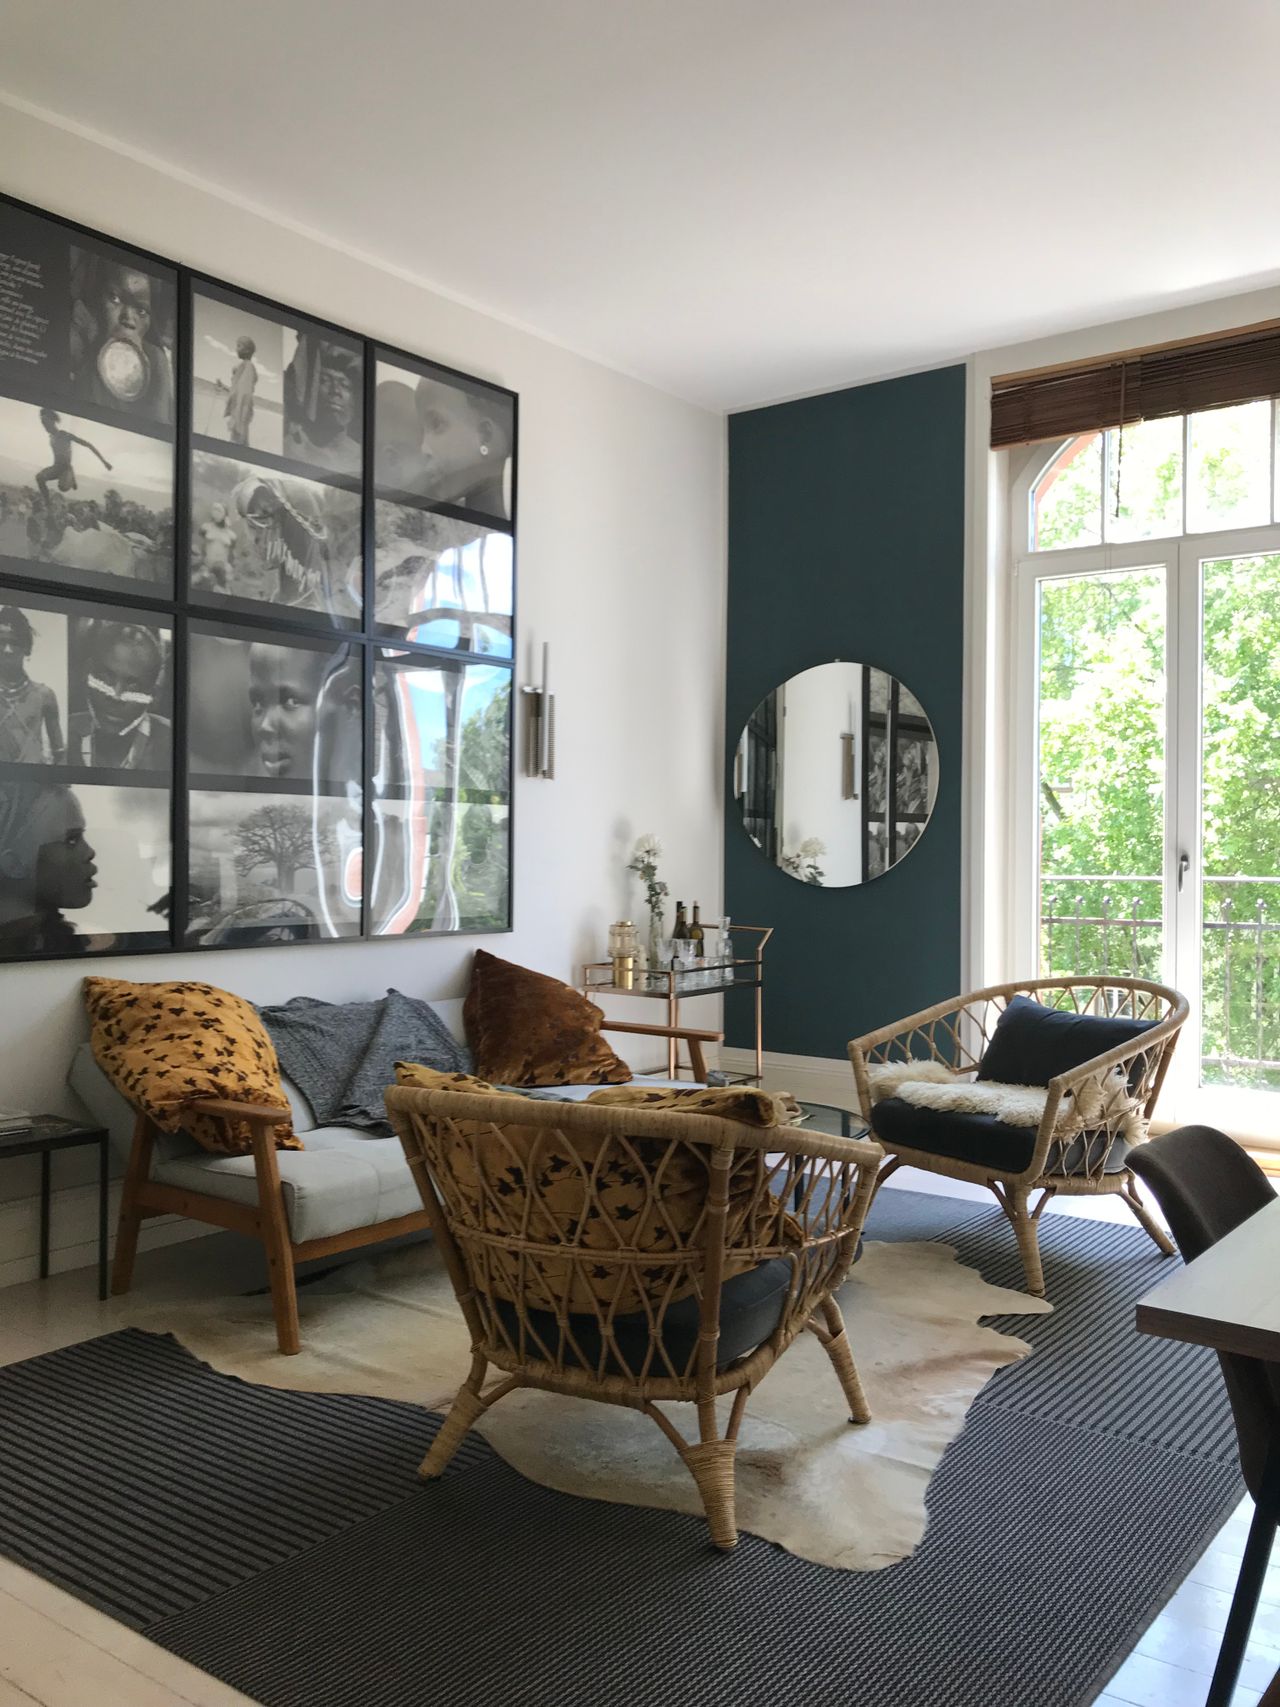 Chic & charming apartement, renovated old building in Frankfurt am Main